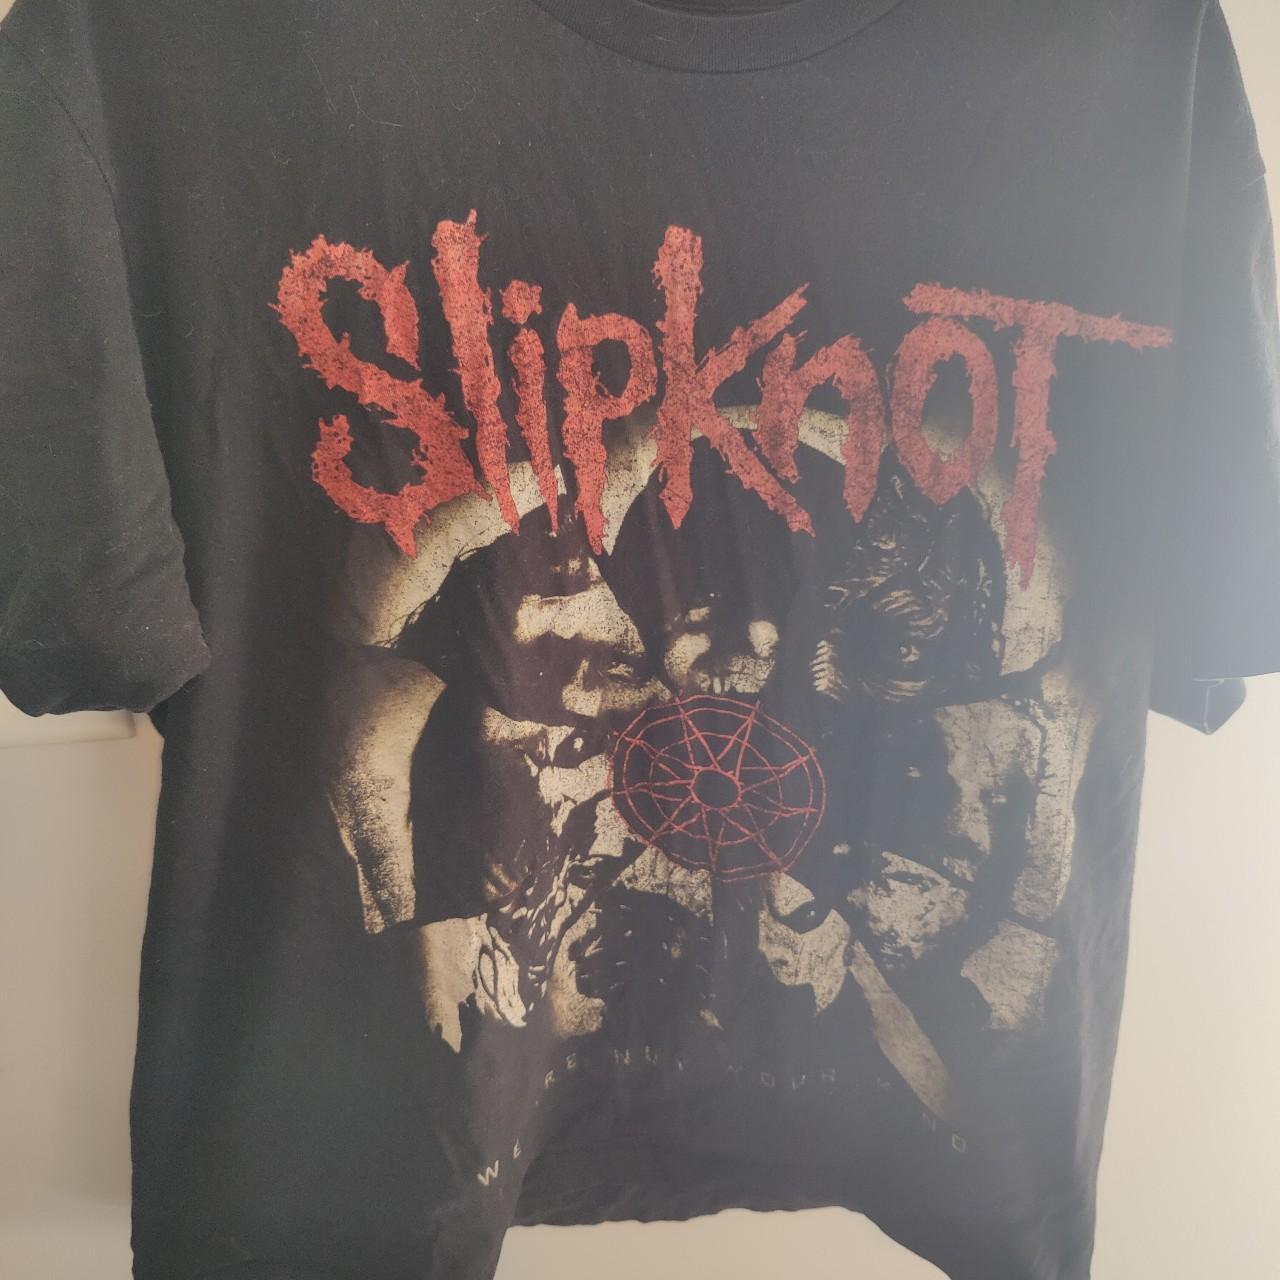 SLIPKNOT band T-shirt has a small hole in the side - Depop